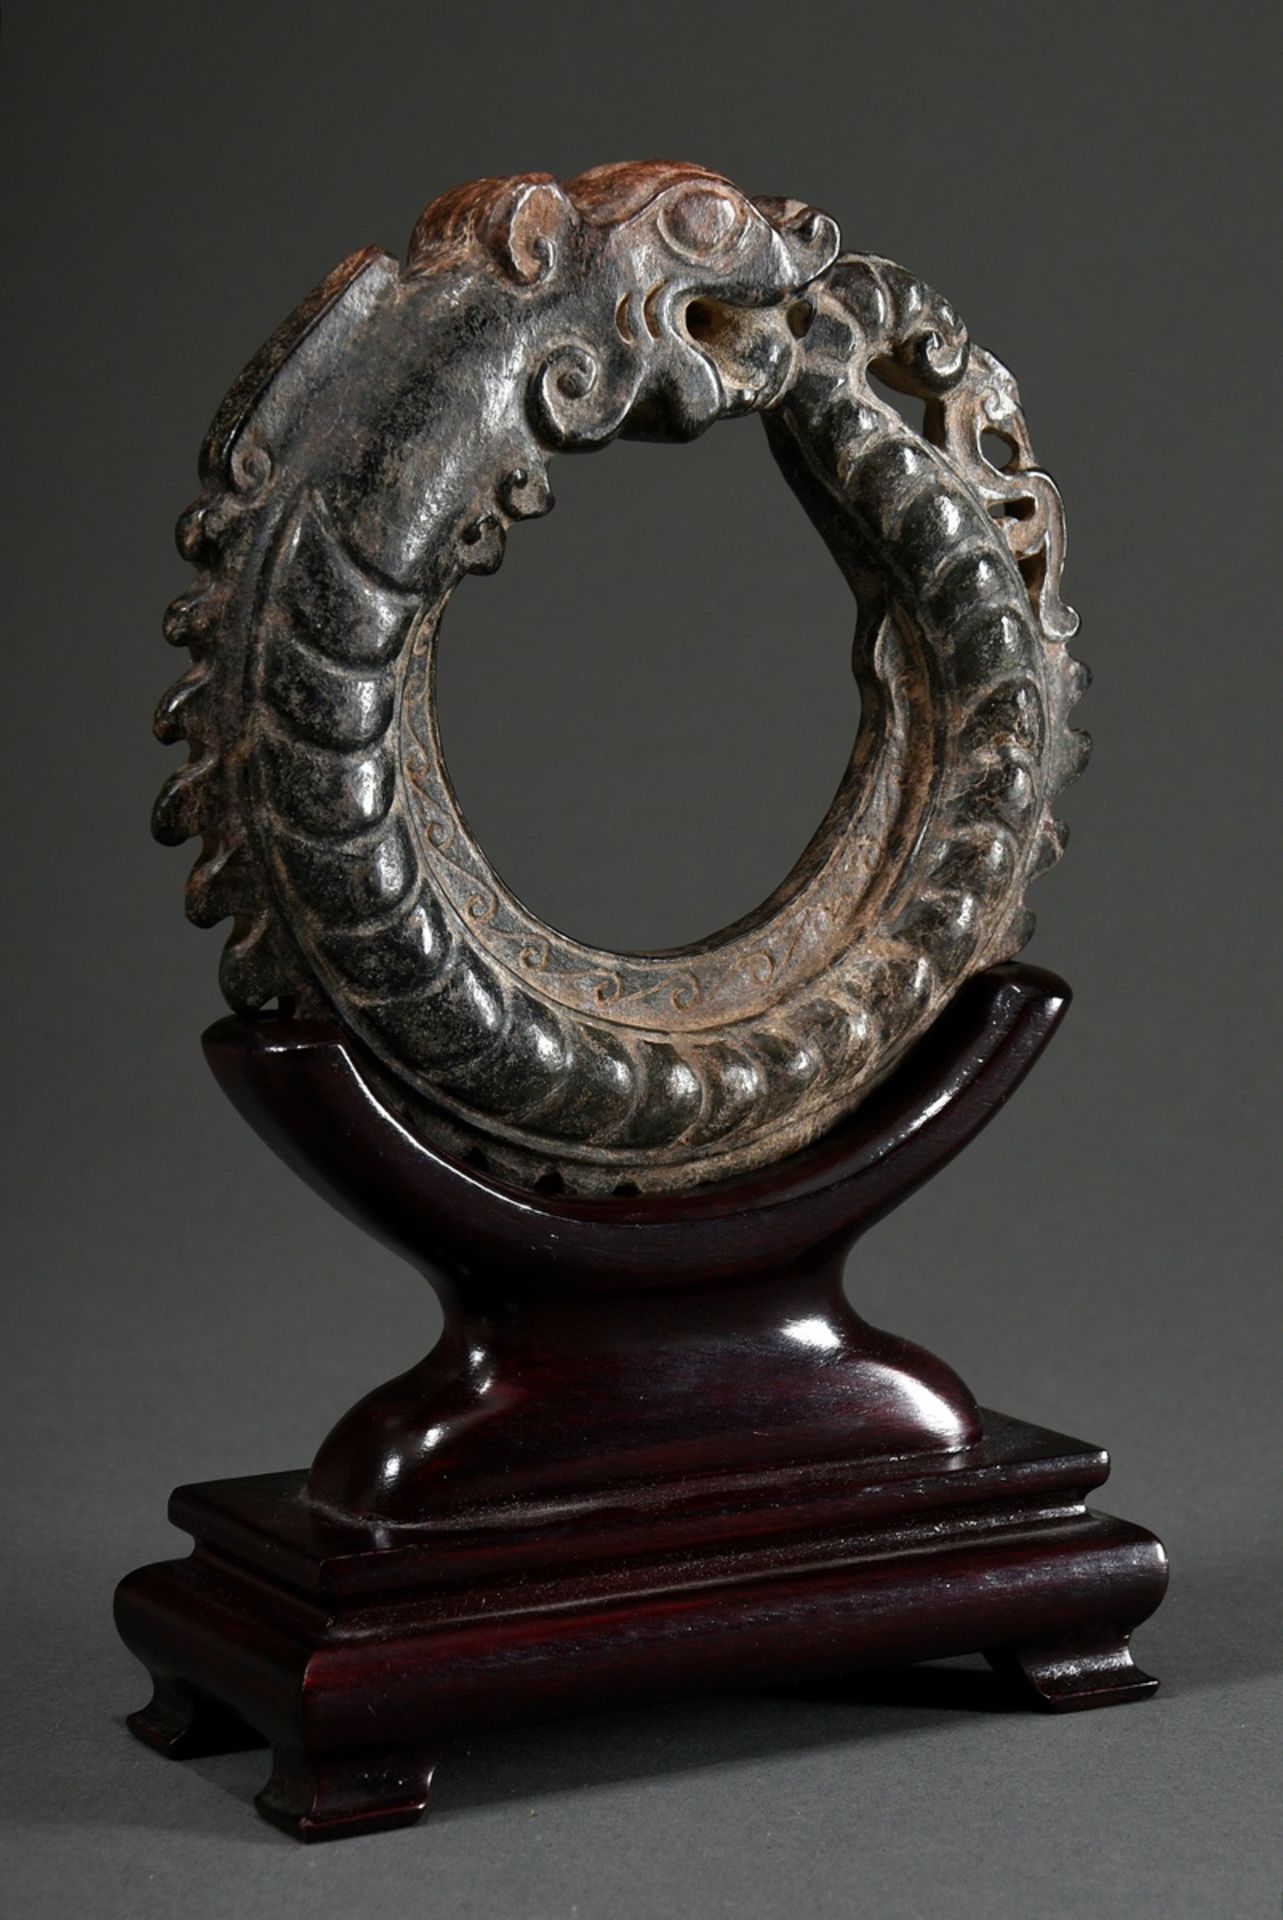 Dark jade carving "Round-laid dragon", powerfully stylised with jagged back and scales, wooden stan